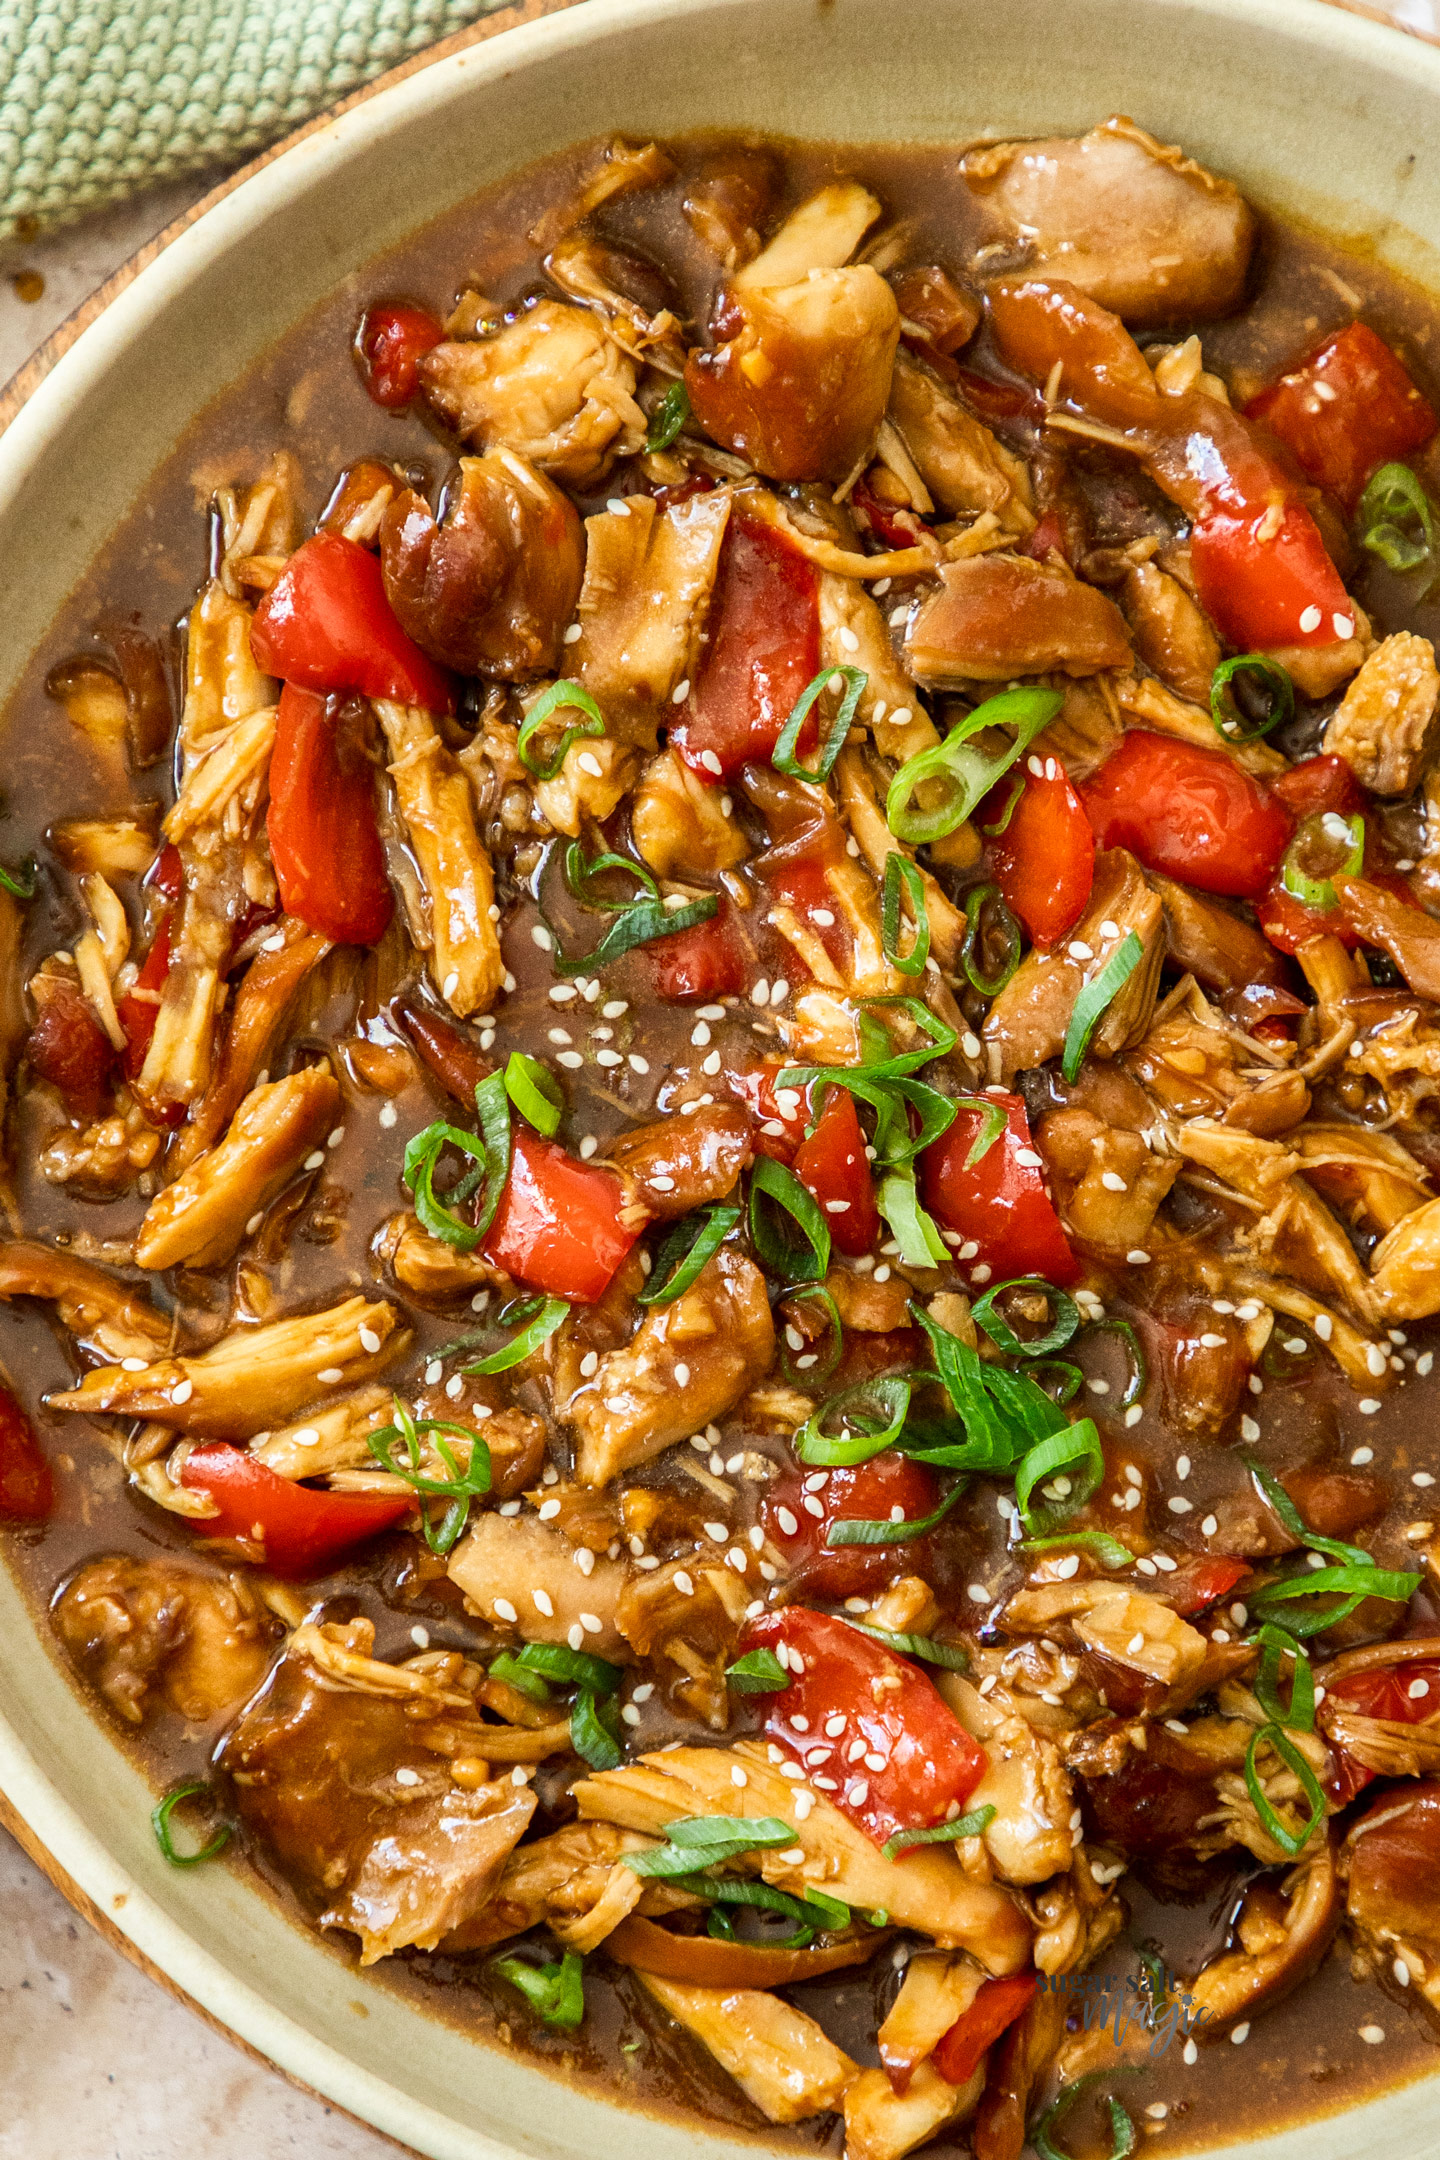 Top down view of shredded honey soy chicken in a large serving dish.